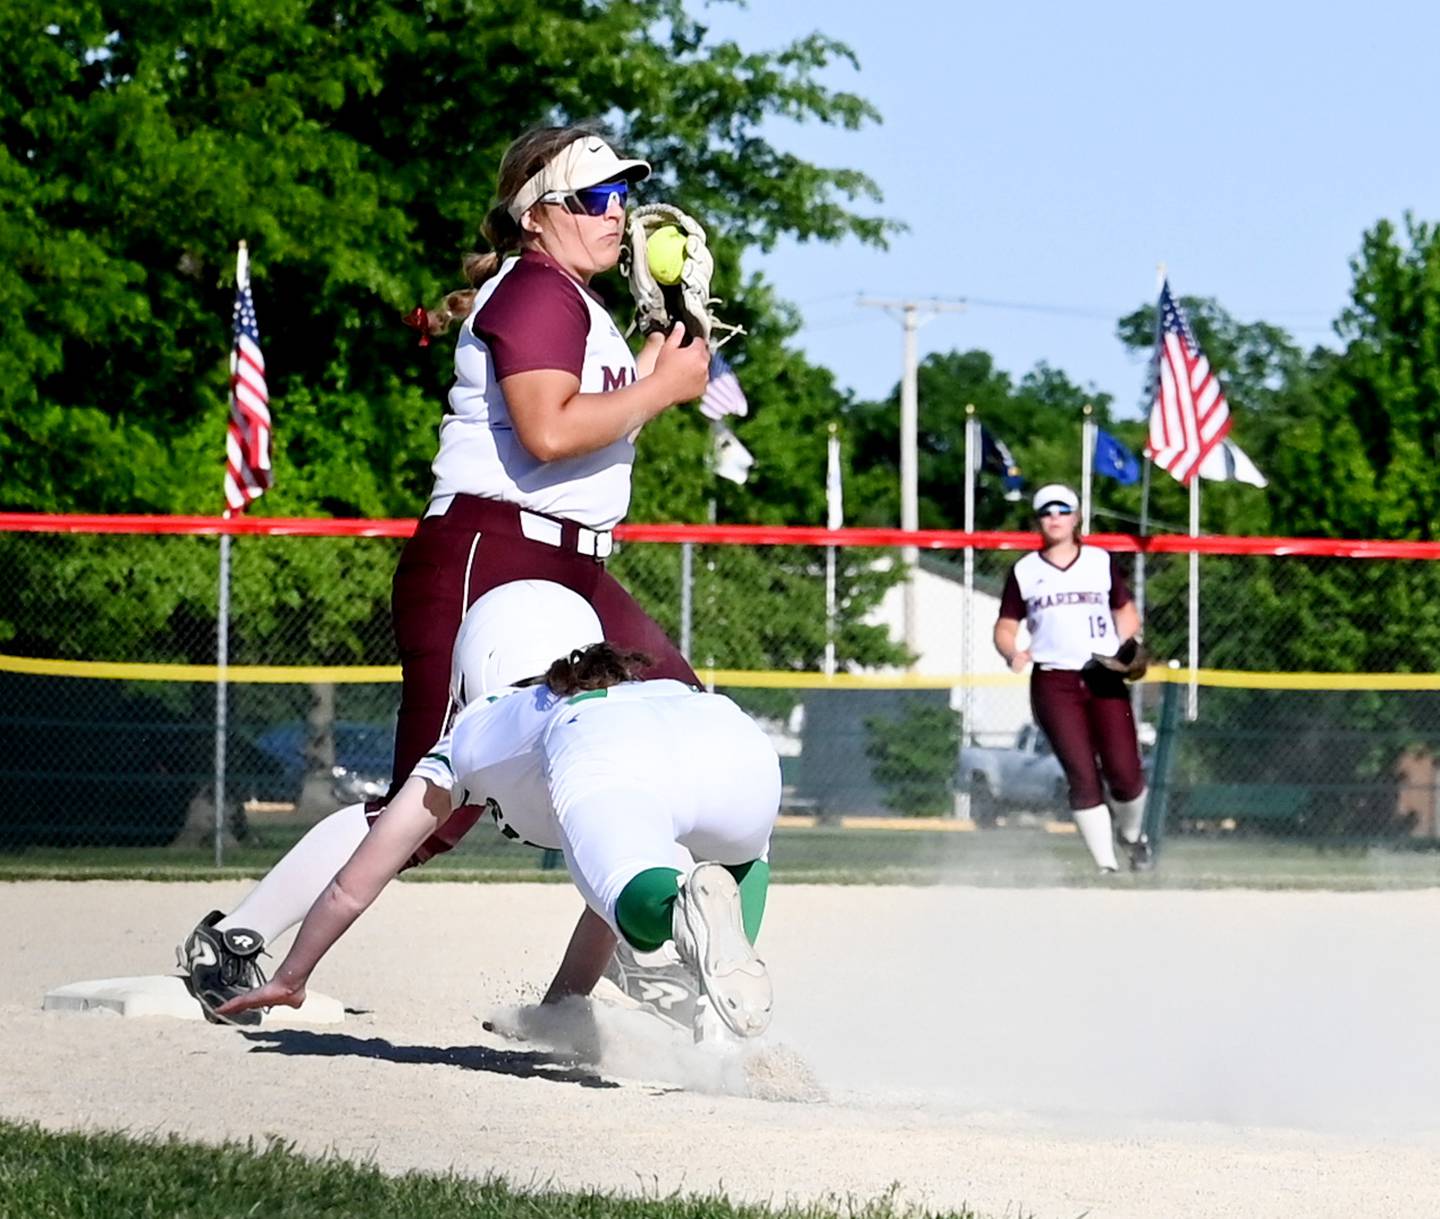 Marengo's Emily White secures the catch at third for a force out of Rock Falls runner Jeslyn Krueger during Friday's Class 2A Stillman Valley Sectional championship game.